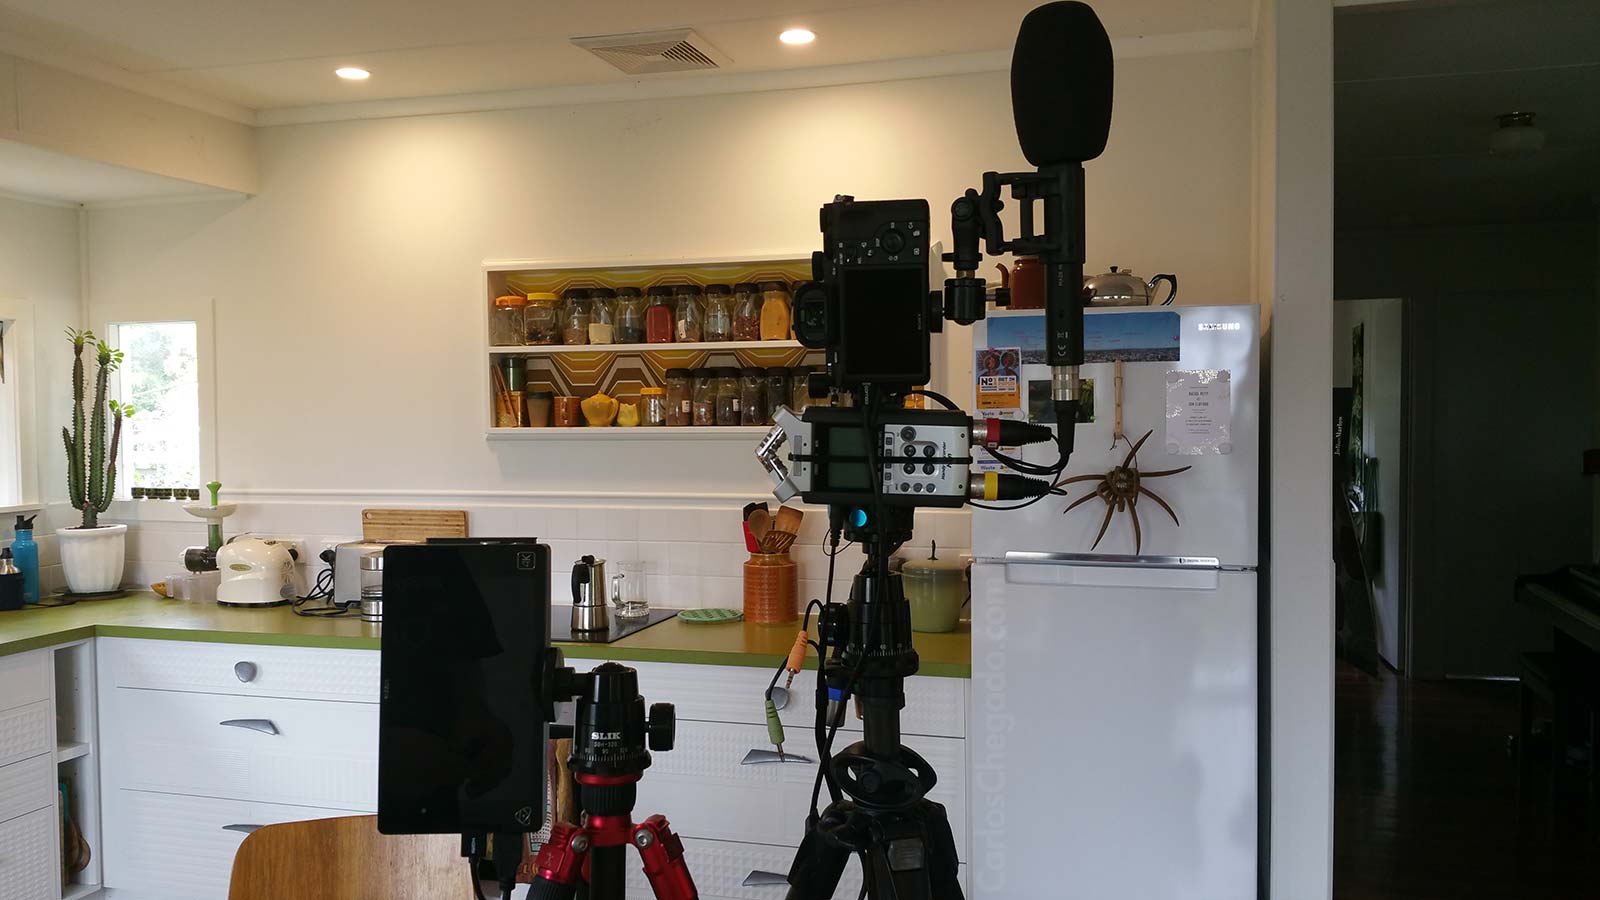 Sony A7R2, Sennheiser AMBEO VR Microphone, Zoom H4N, ATOMOS Recorder plus tripods used on the interior scenes